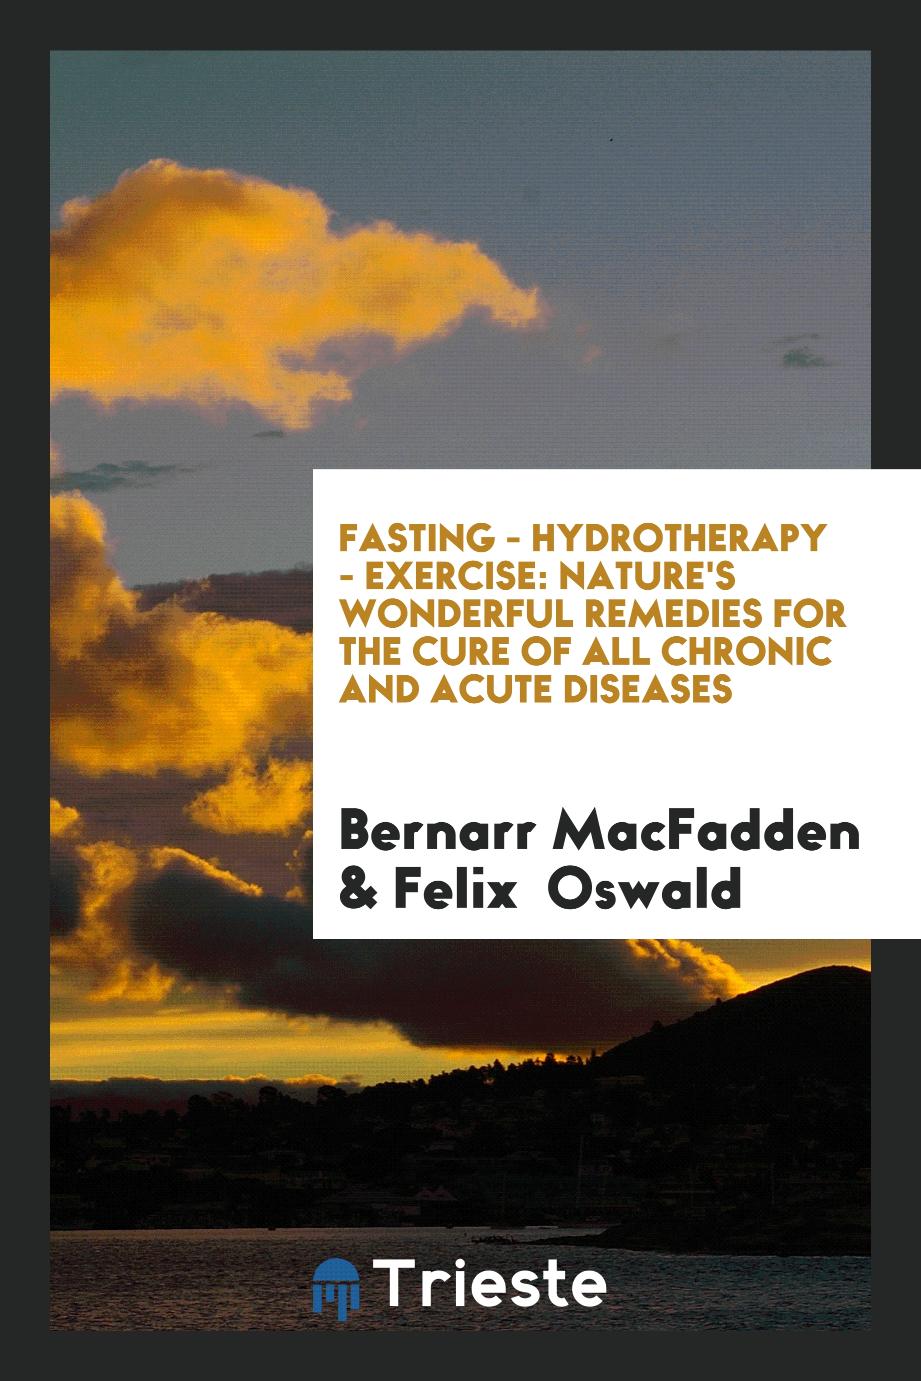 Bernarr MacFadden, Felix  Oswald - Fasting - Hydrotherapy - Exercise: Nature's Wonderful Remedies for the Cure of All Chronic and Acute Diseases